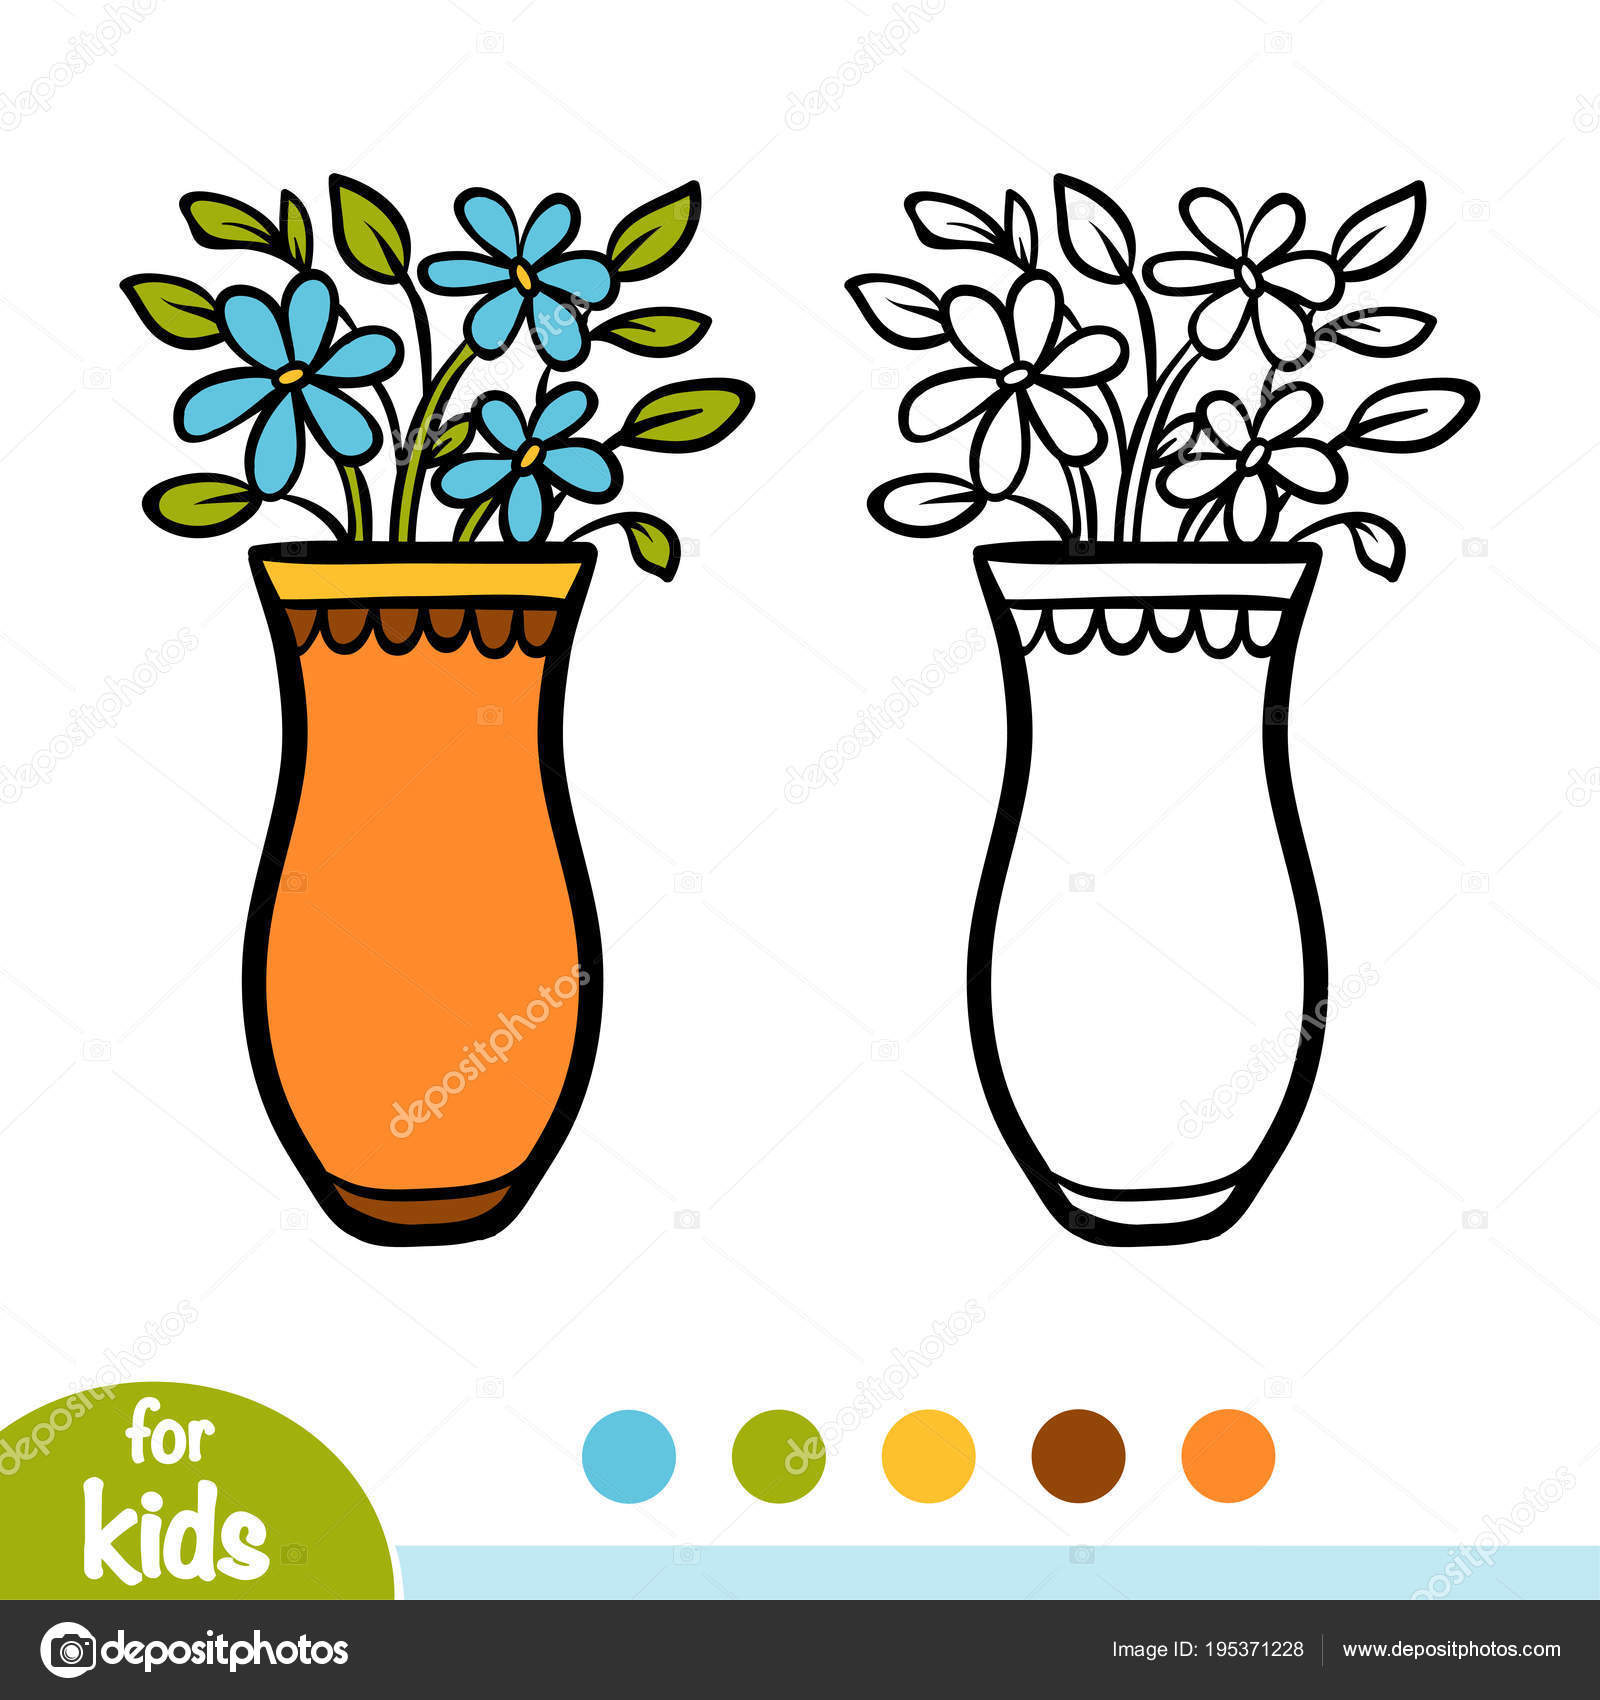 Art for Small Hands: Drawing - Small Pots with Flowers